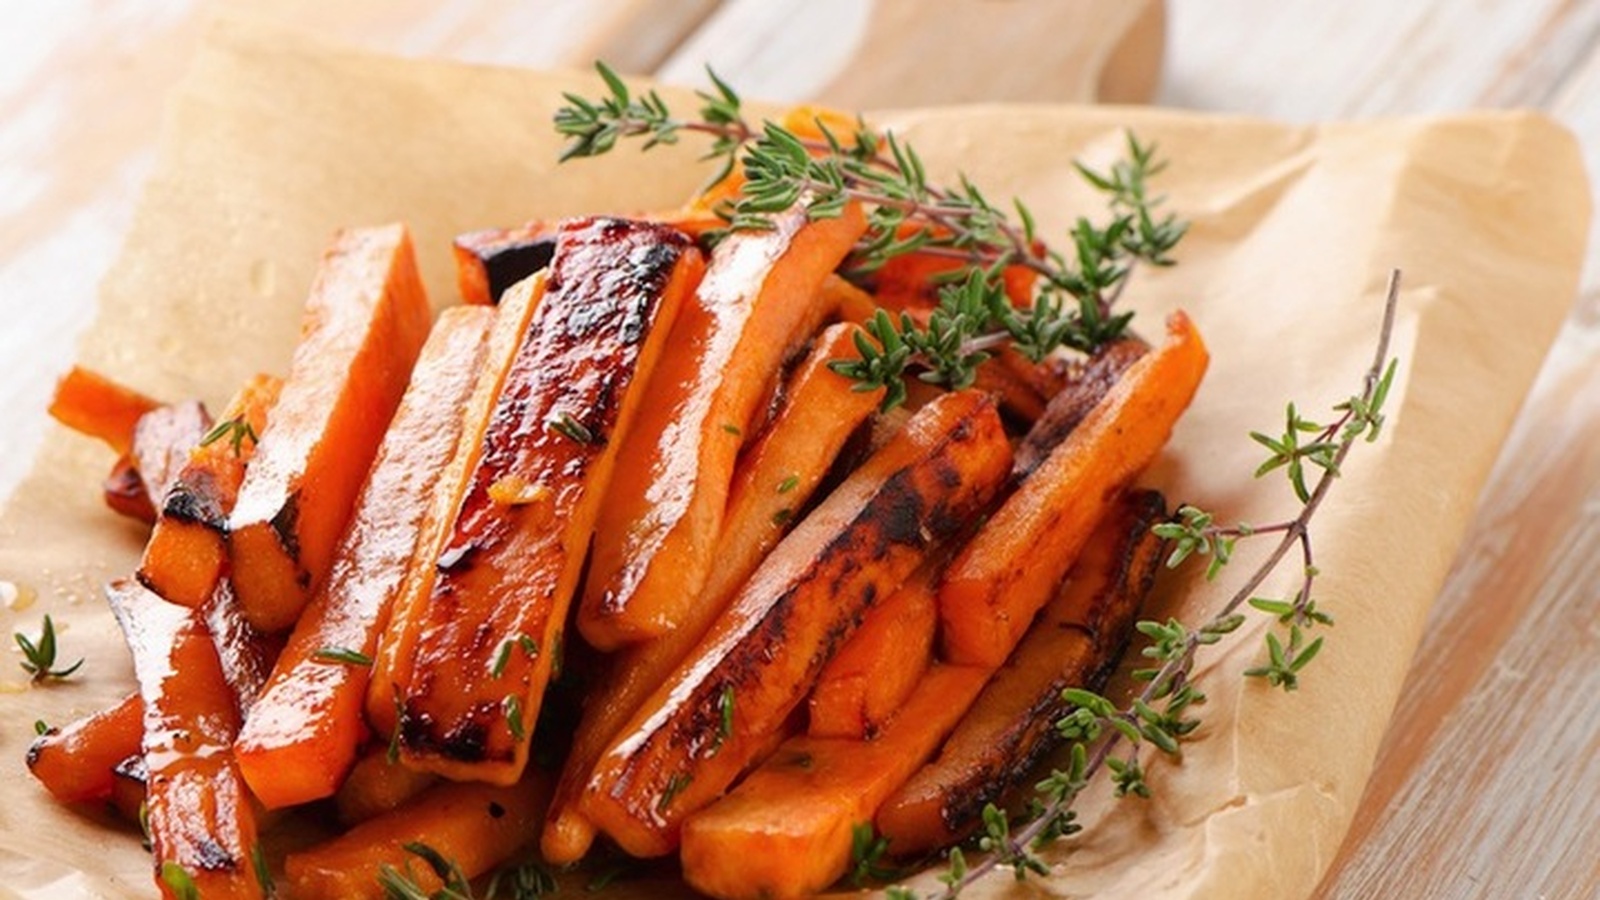 12 Reasons Why Sweet Potato Is So Good For You